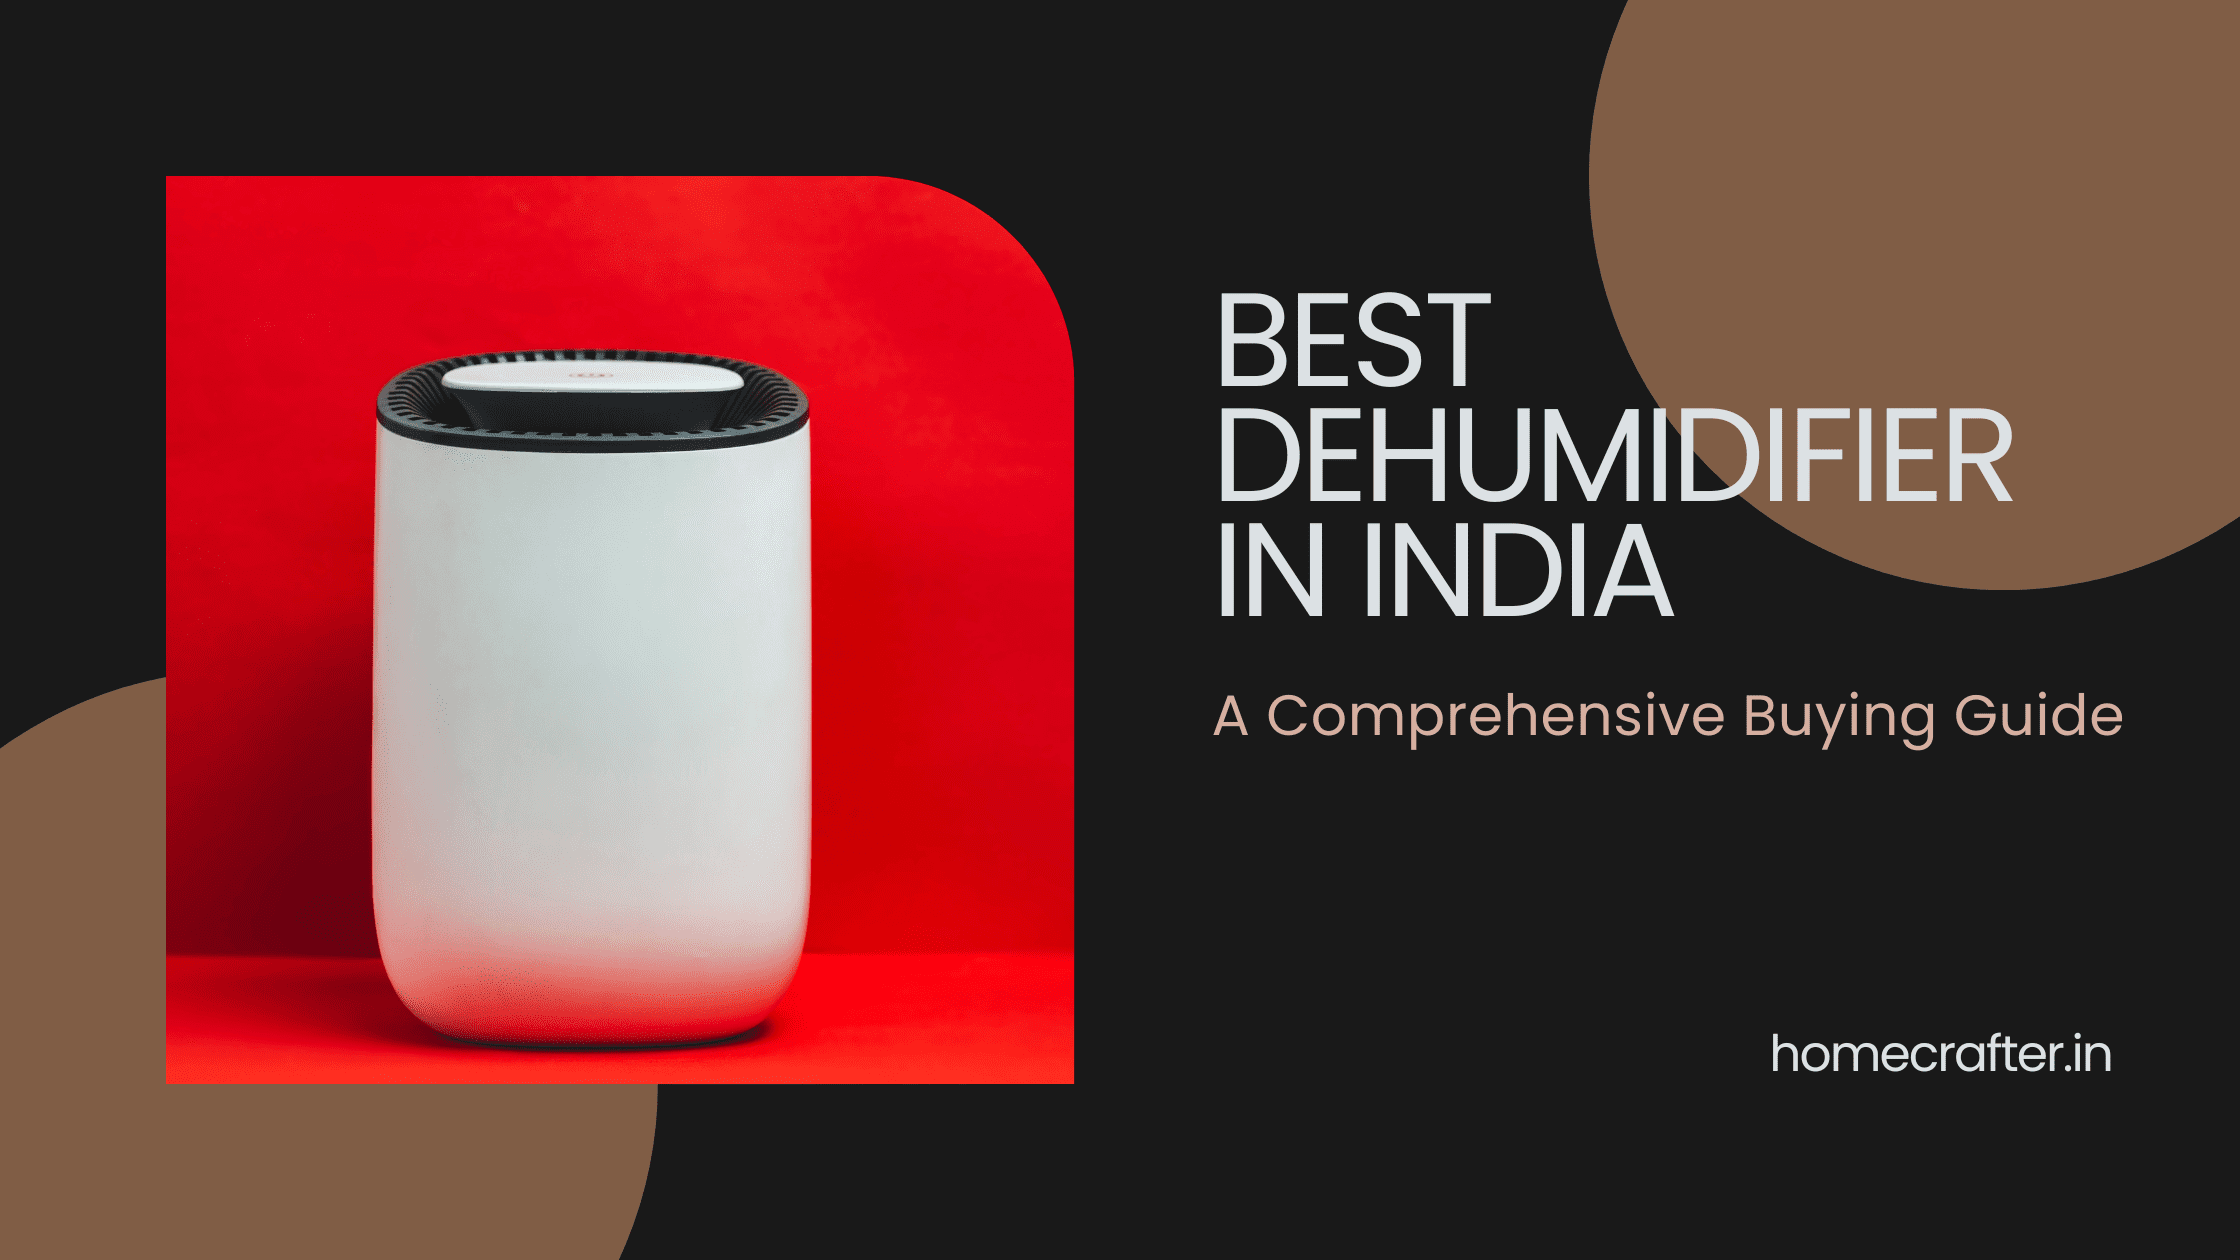 Best Dehumidifier in India: A Comprehensive Buying Guide